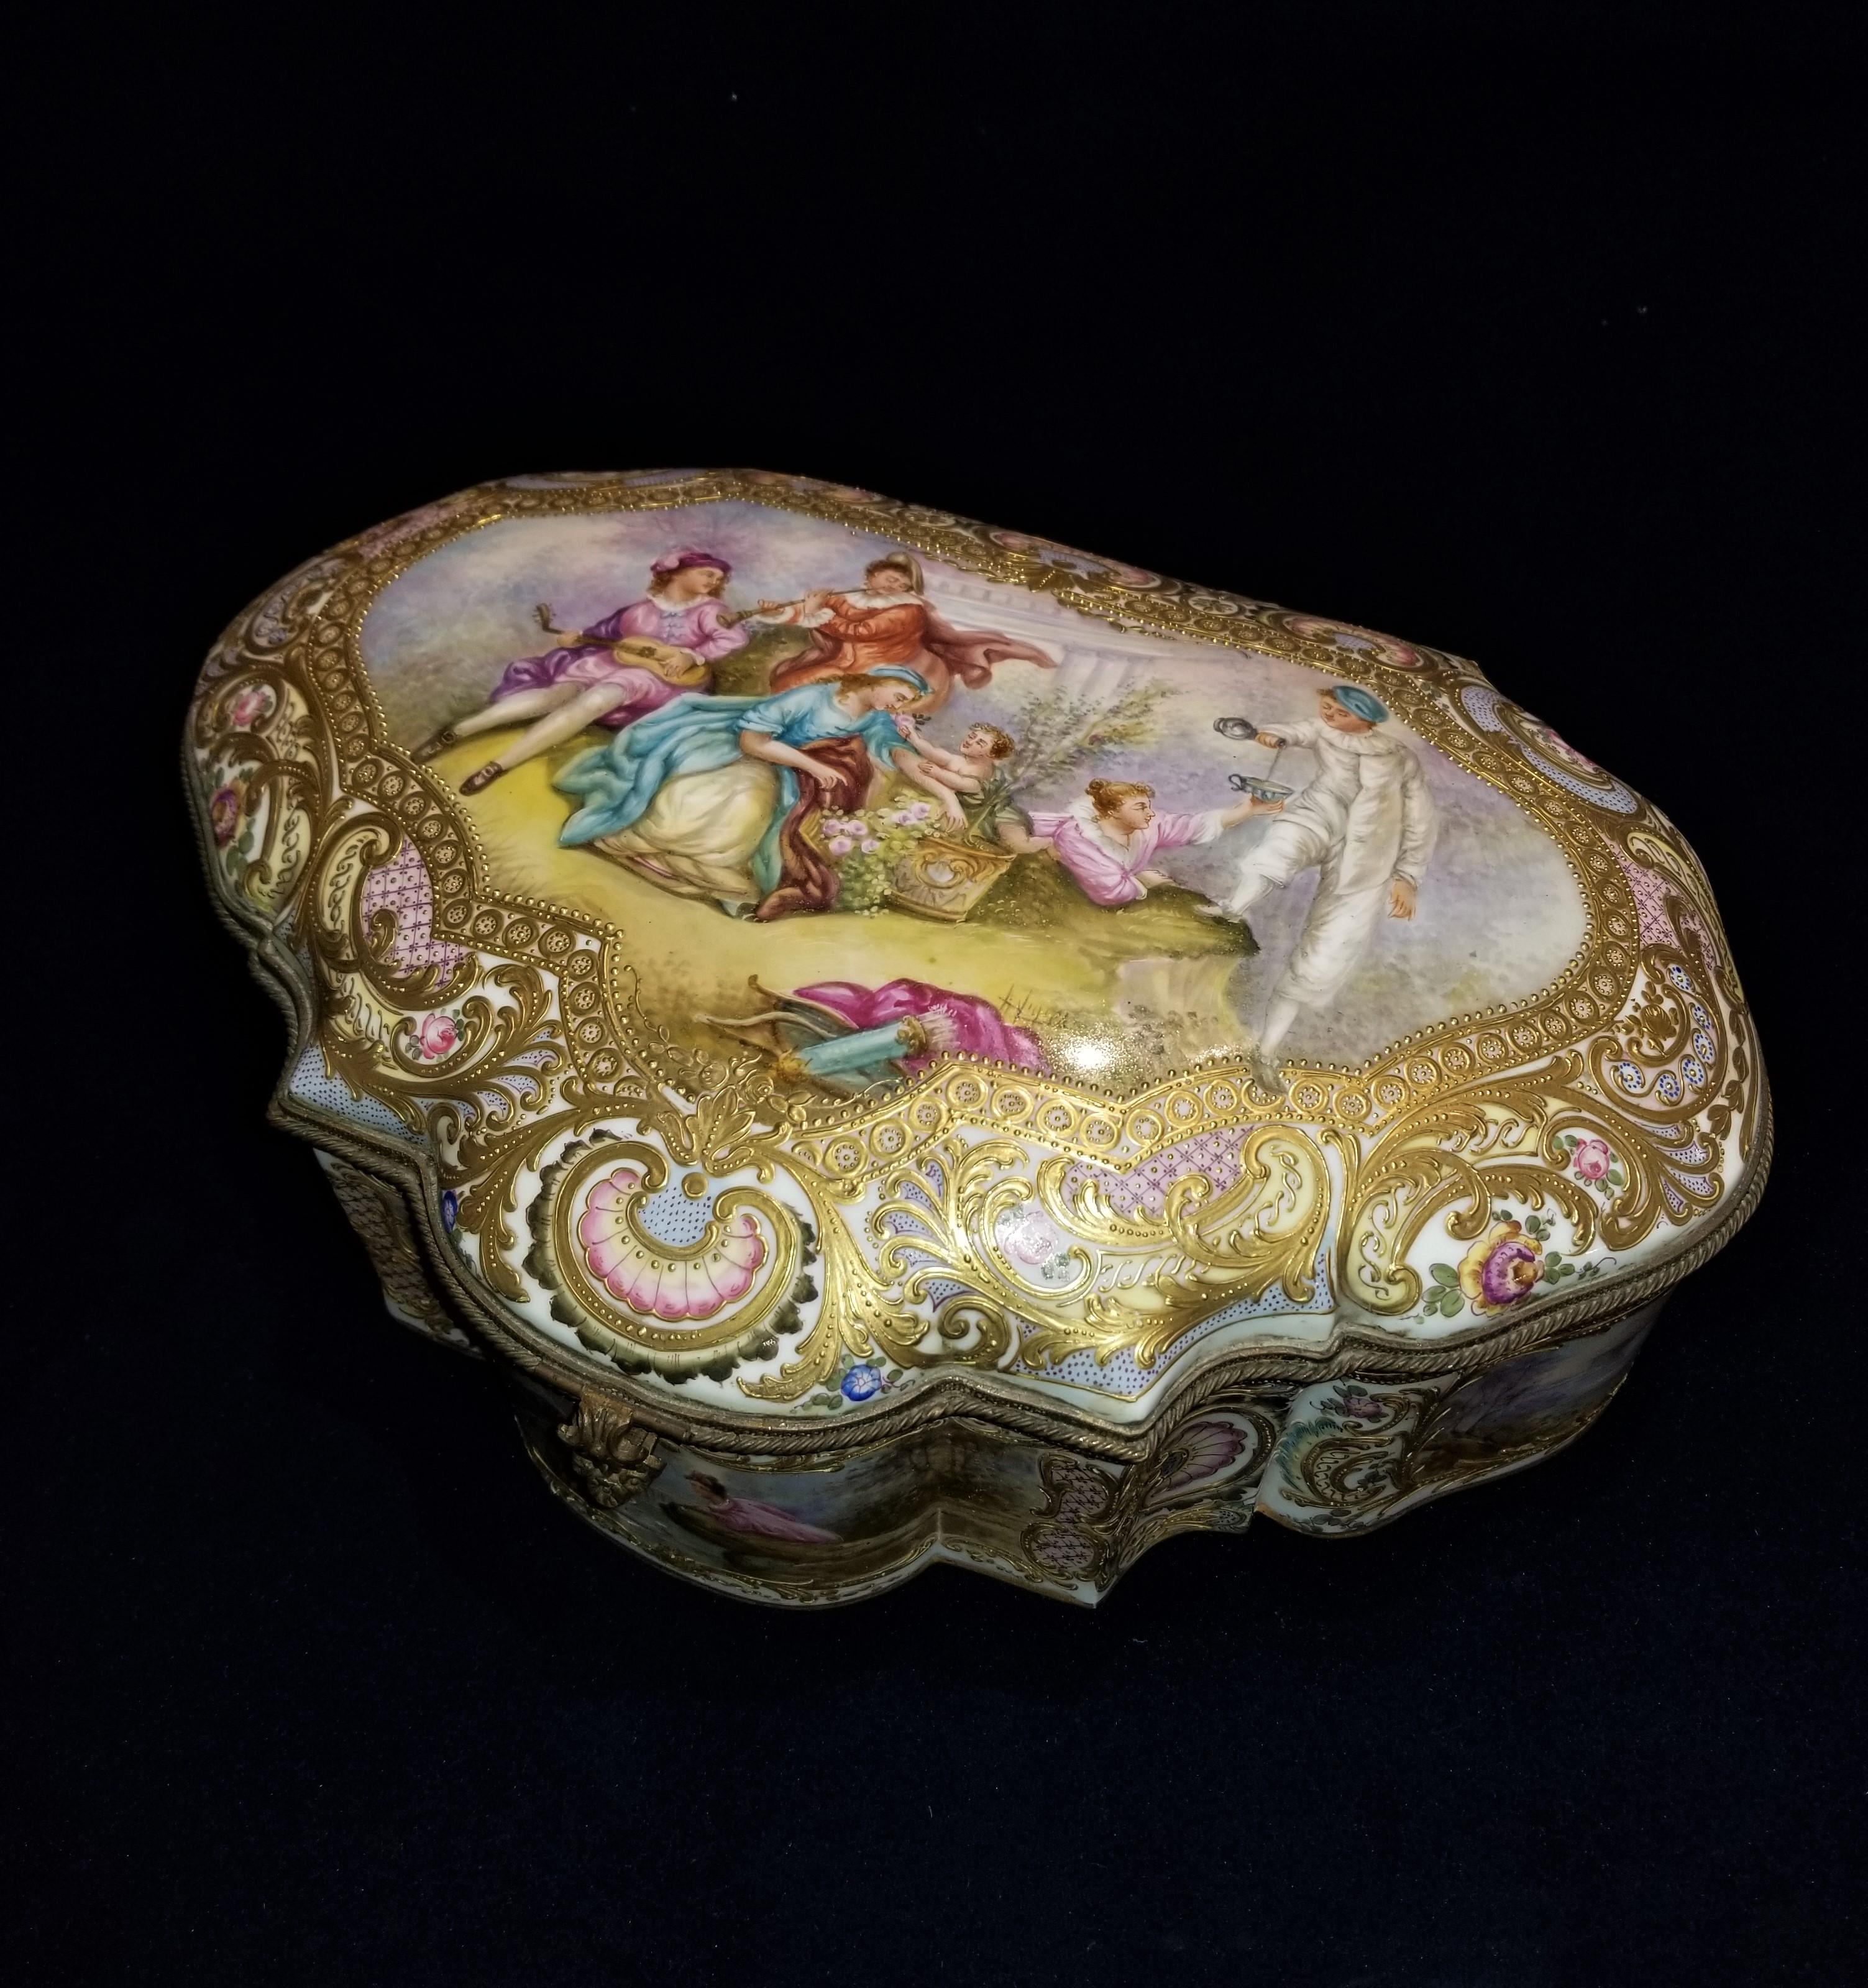 A beautiful 19th century gilt bronze mounted sevres jewel box and cover with multi-panel scenes. Of cartouche shape, the top painted with two maidens reclining in a garden attended by Cupid, two musicians and the Commedia dell'Arte figure Pierrot